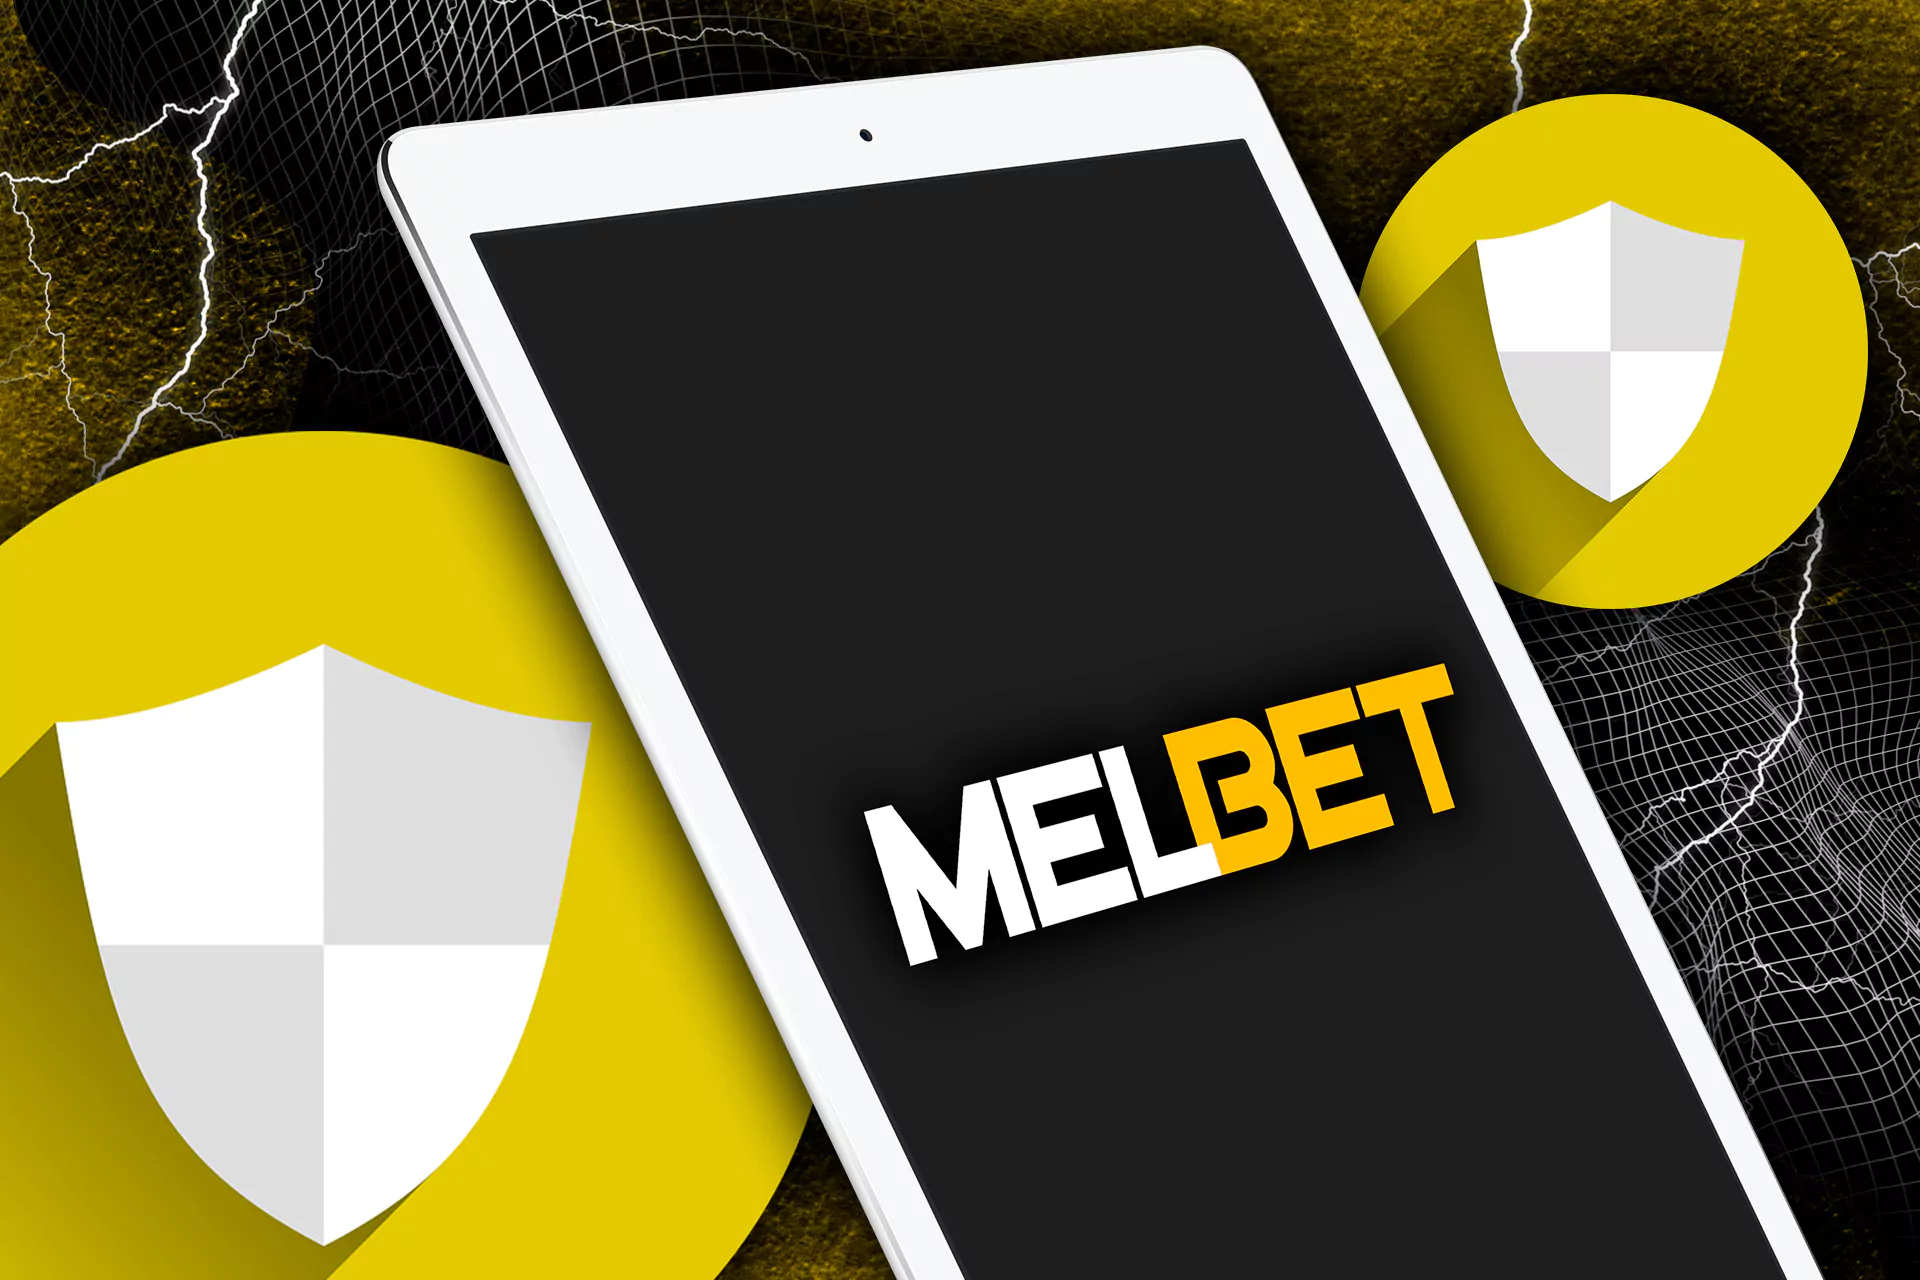 You can be sure that your data is under strong protection of Melbet.